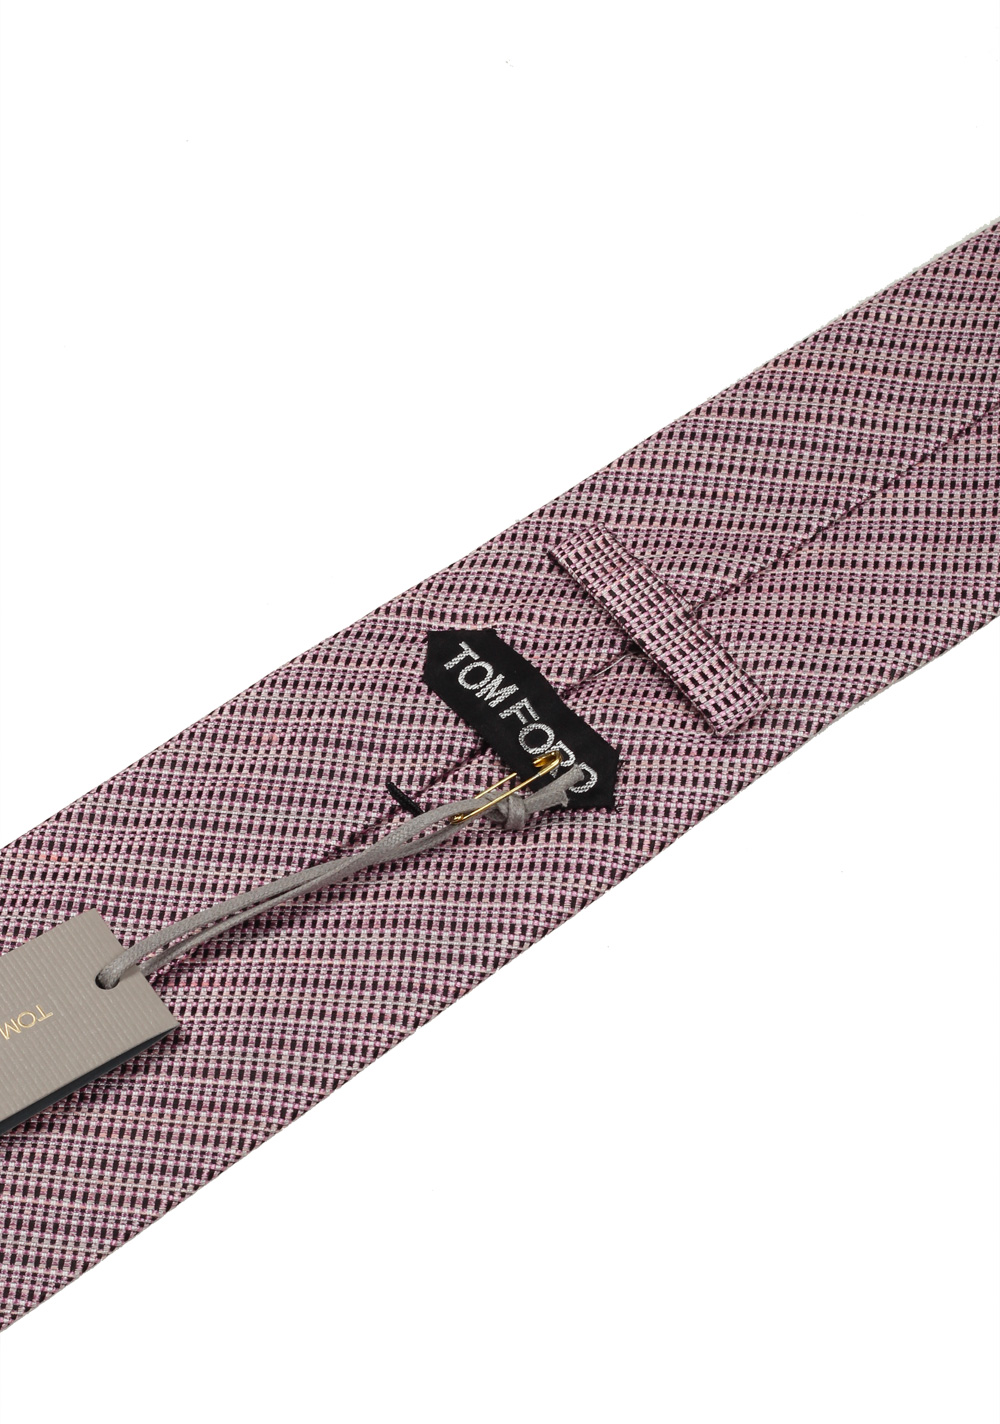 TOM FORD Patterned Pink Tie In Silk | Costume LimitÃ©